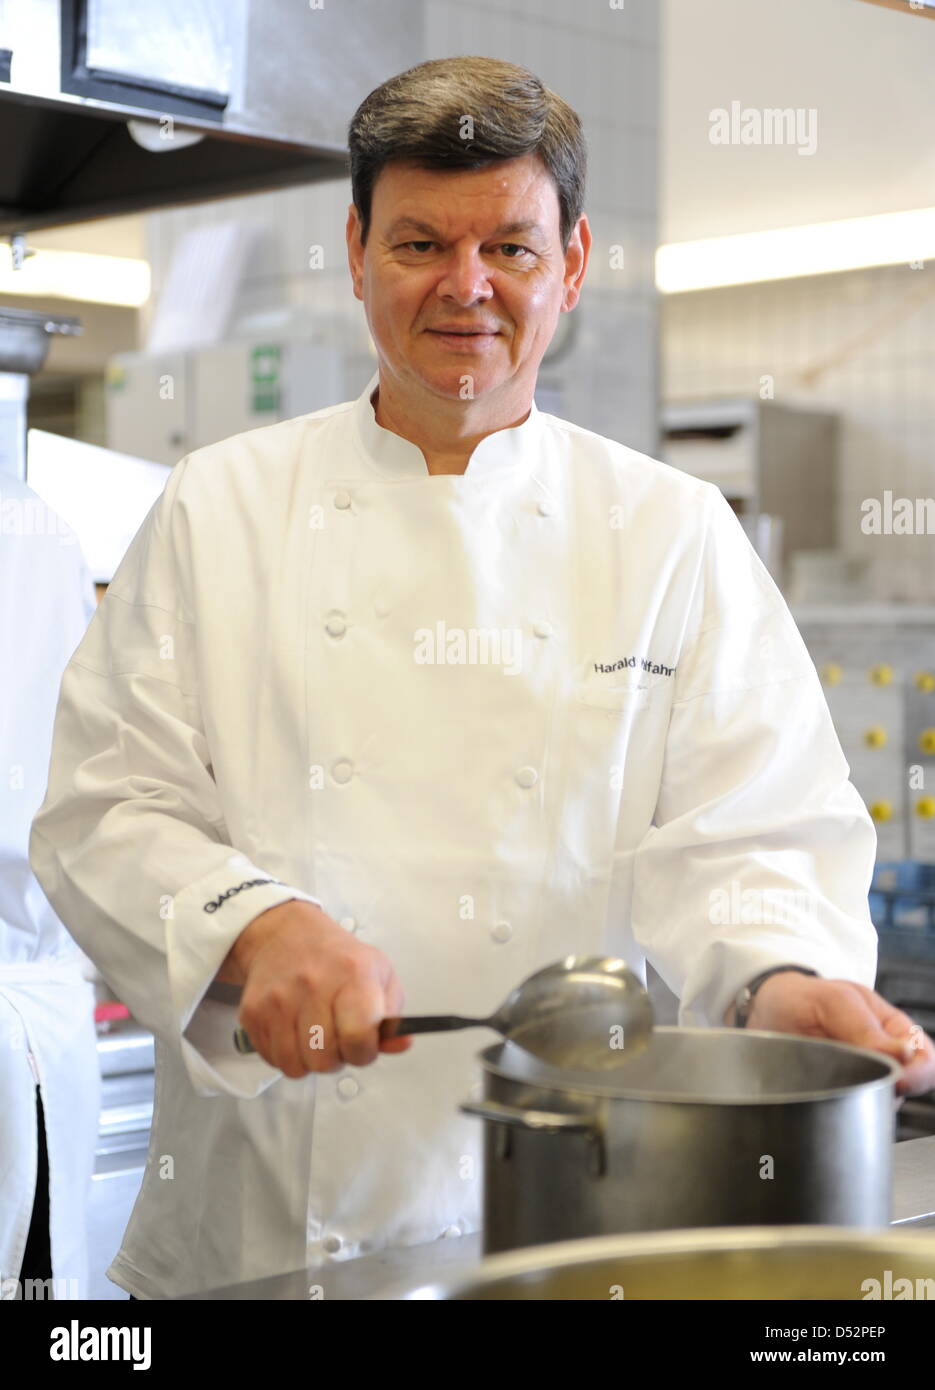 Three star cook Harald Wohlfahrt, considered to be Germany's best cook in the last years, at work at his 'Schwarzwaldstube' restaurant in Baiersbronn-Tonbach, Germany, 05 March 2010. Wohlfahrt is chef of Schwarzwaldstube since 1980. He earned himself his third 'Michelin' star in 1992. Photo: Bernd Weissbrod Stock Photo